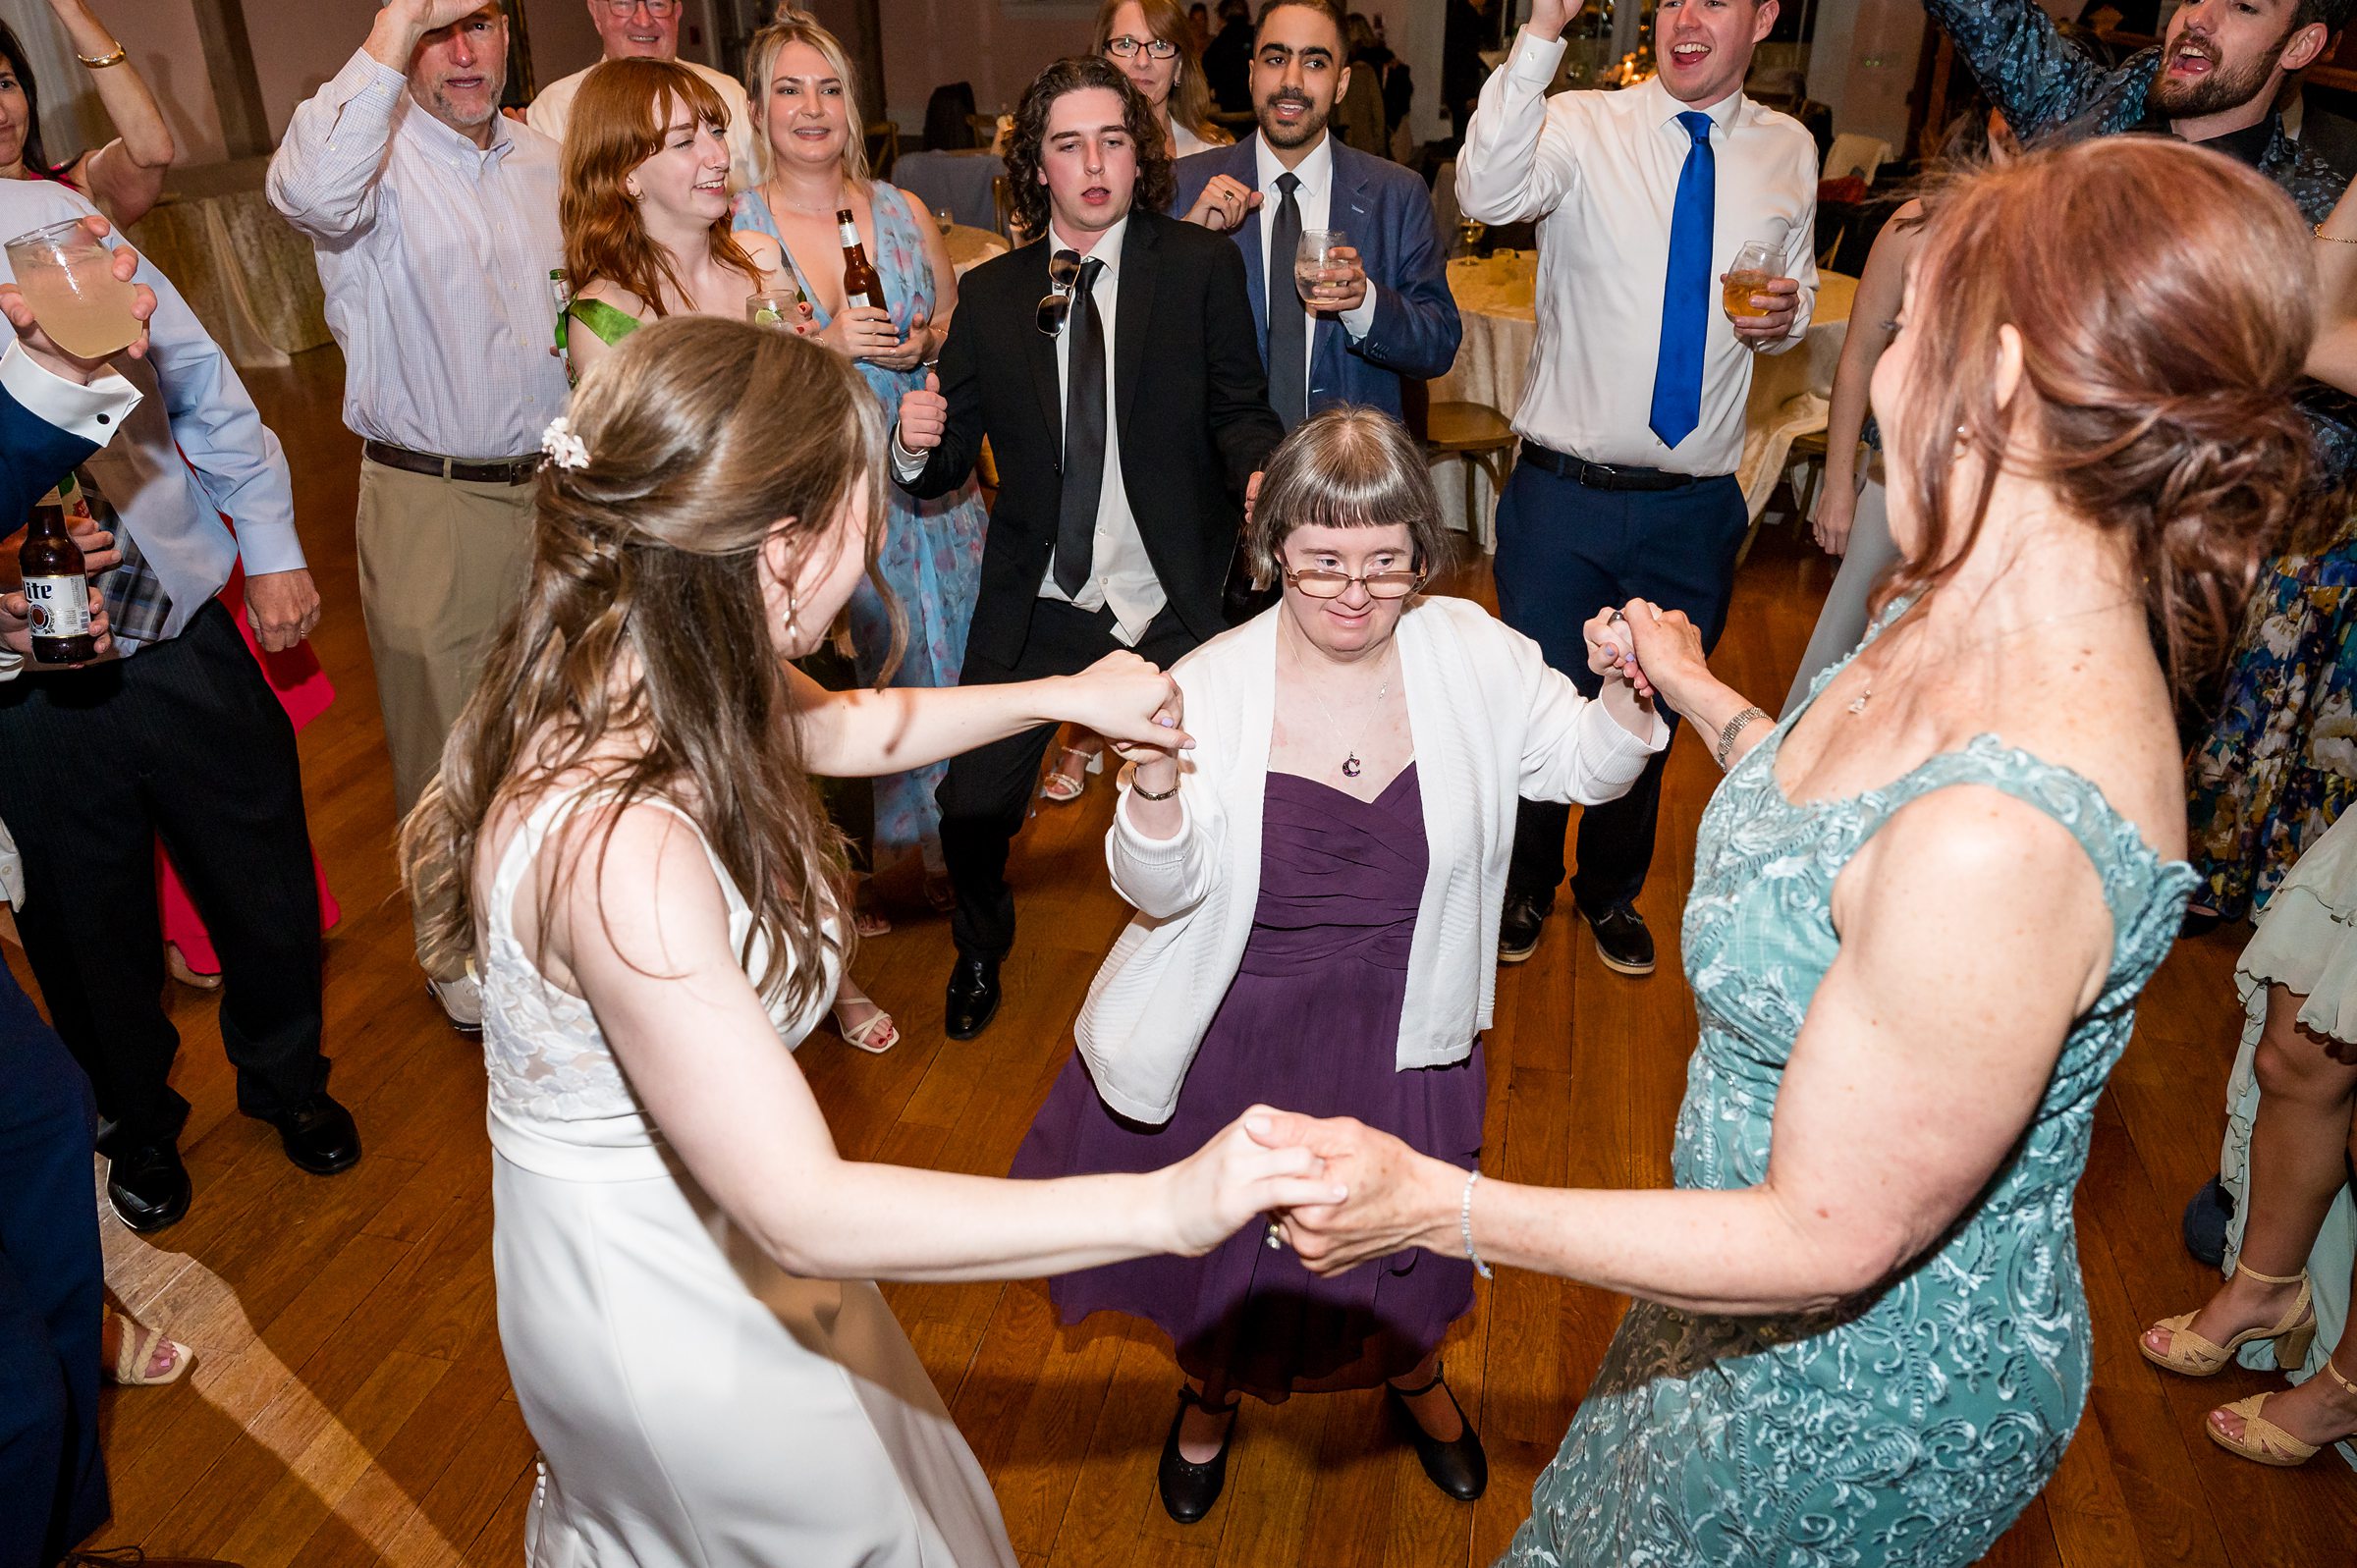 A group of people dressed in formal attire are dancing in a circle at a social event. Some are raising their arms, and three women in the center hold hands, one of them in a white dress.